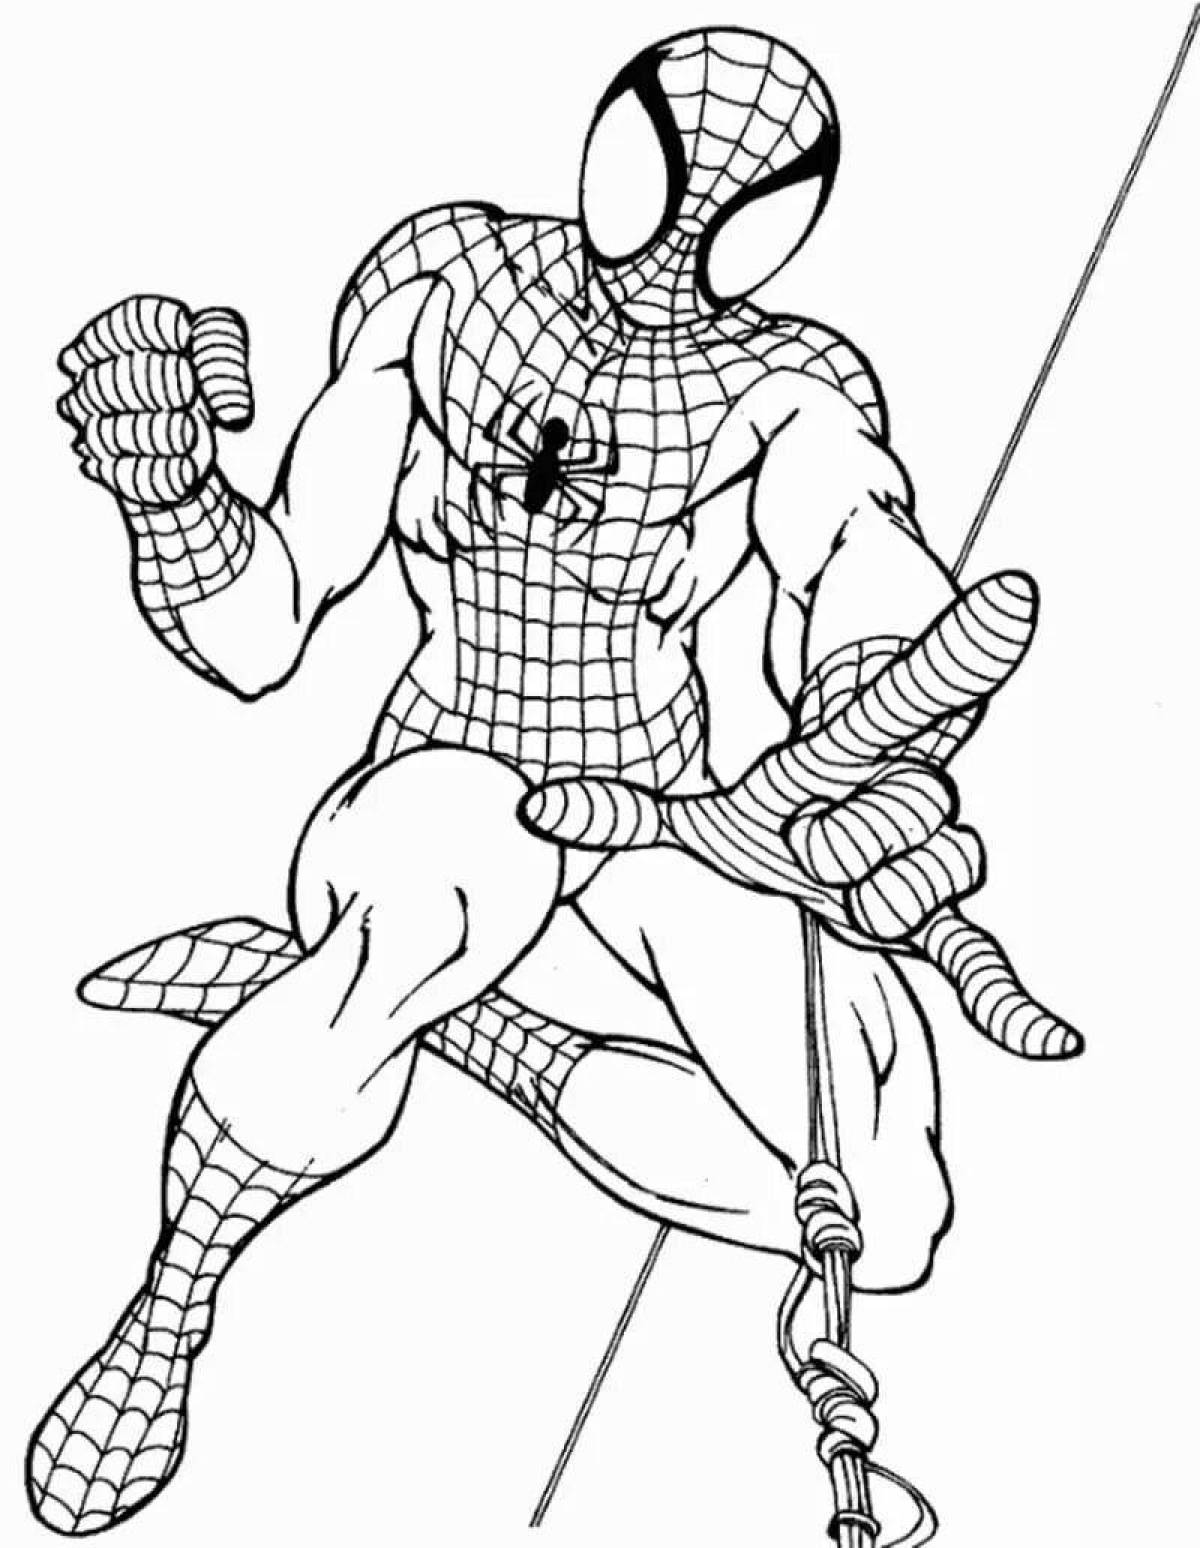 Funny spider-man coloring book